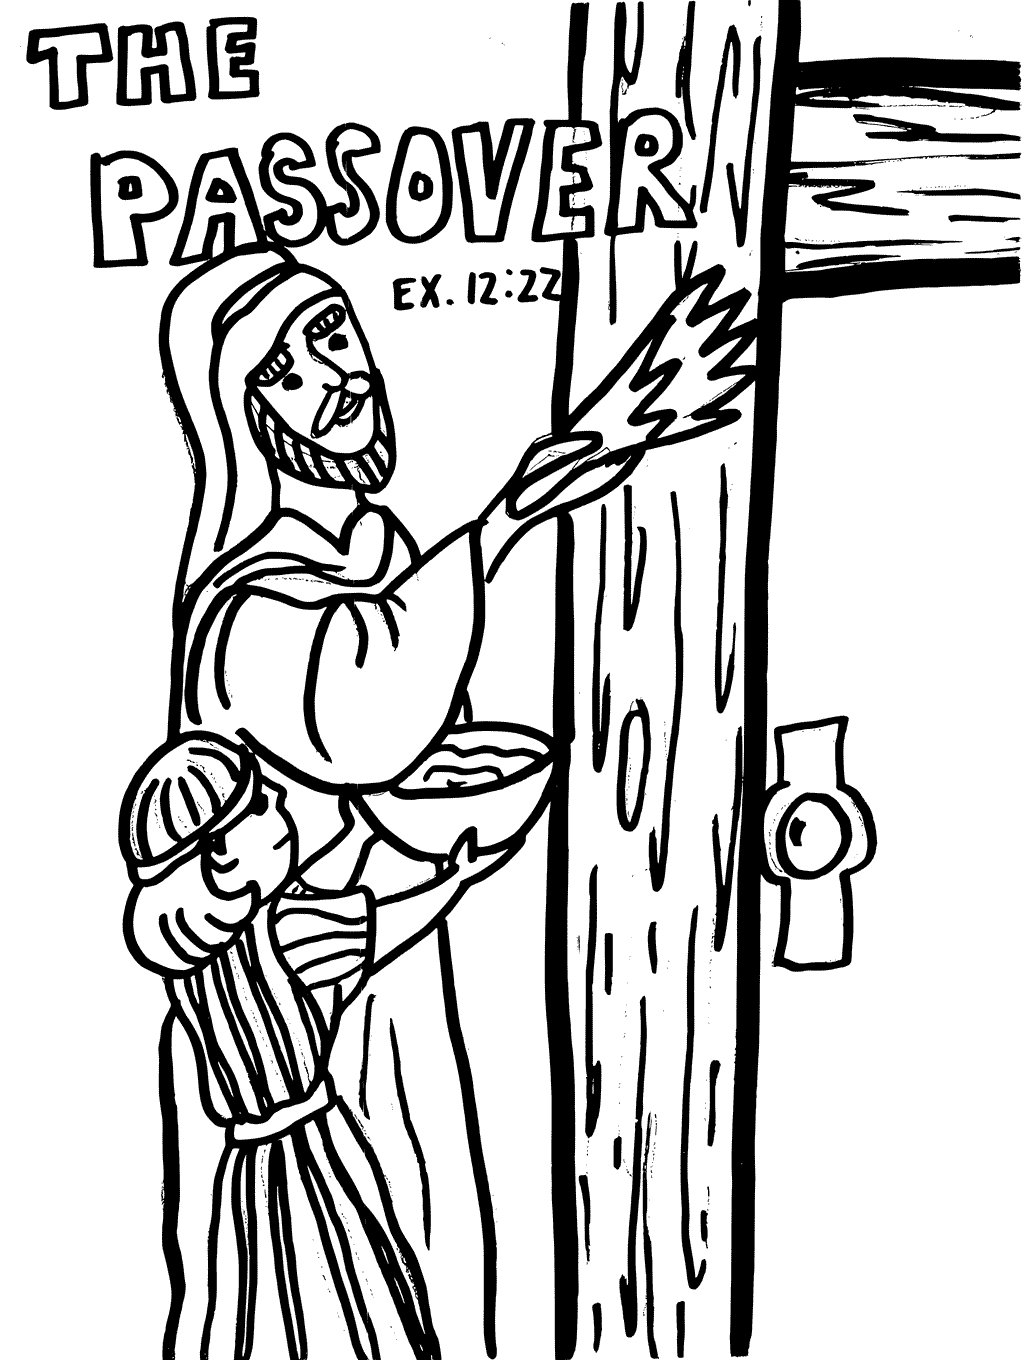 The Passover from Passover